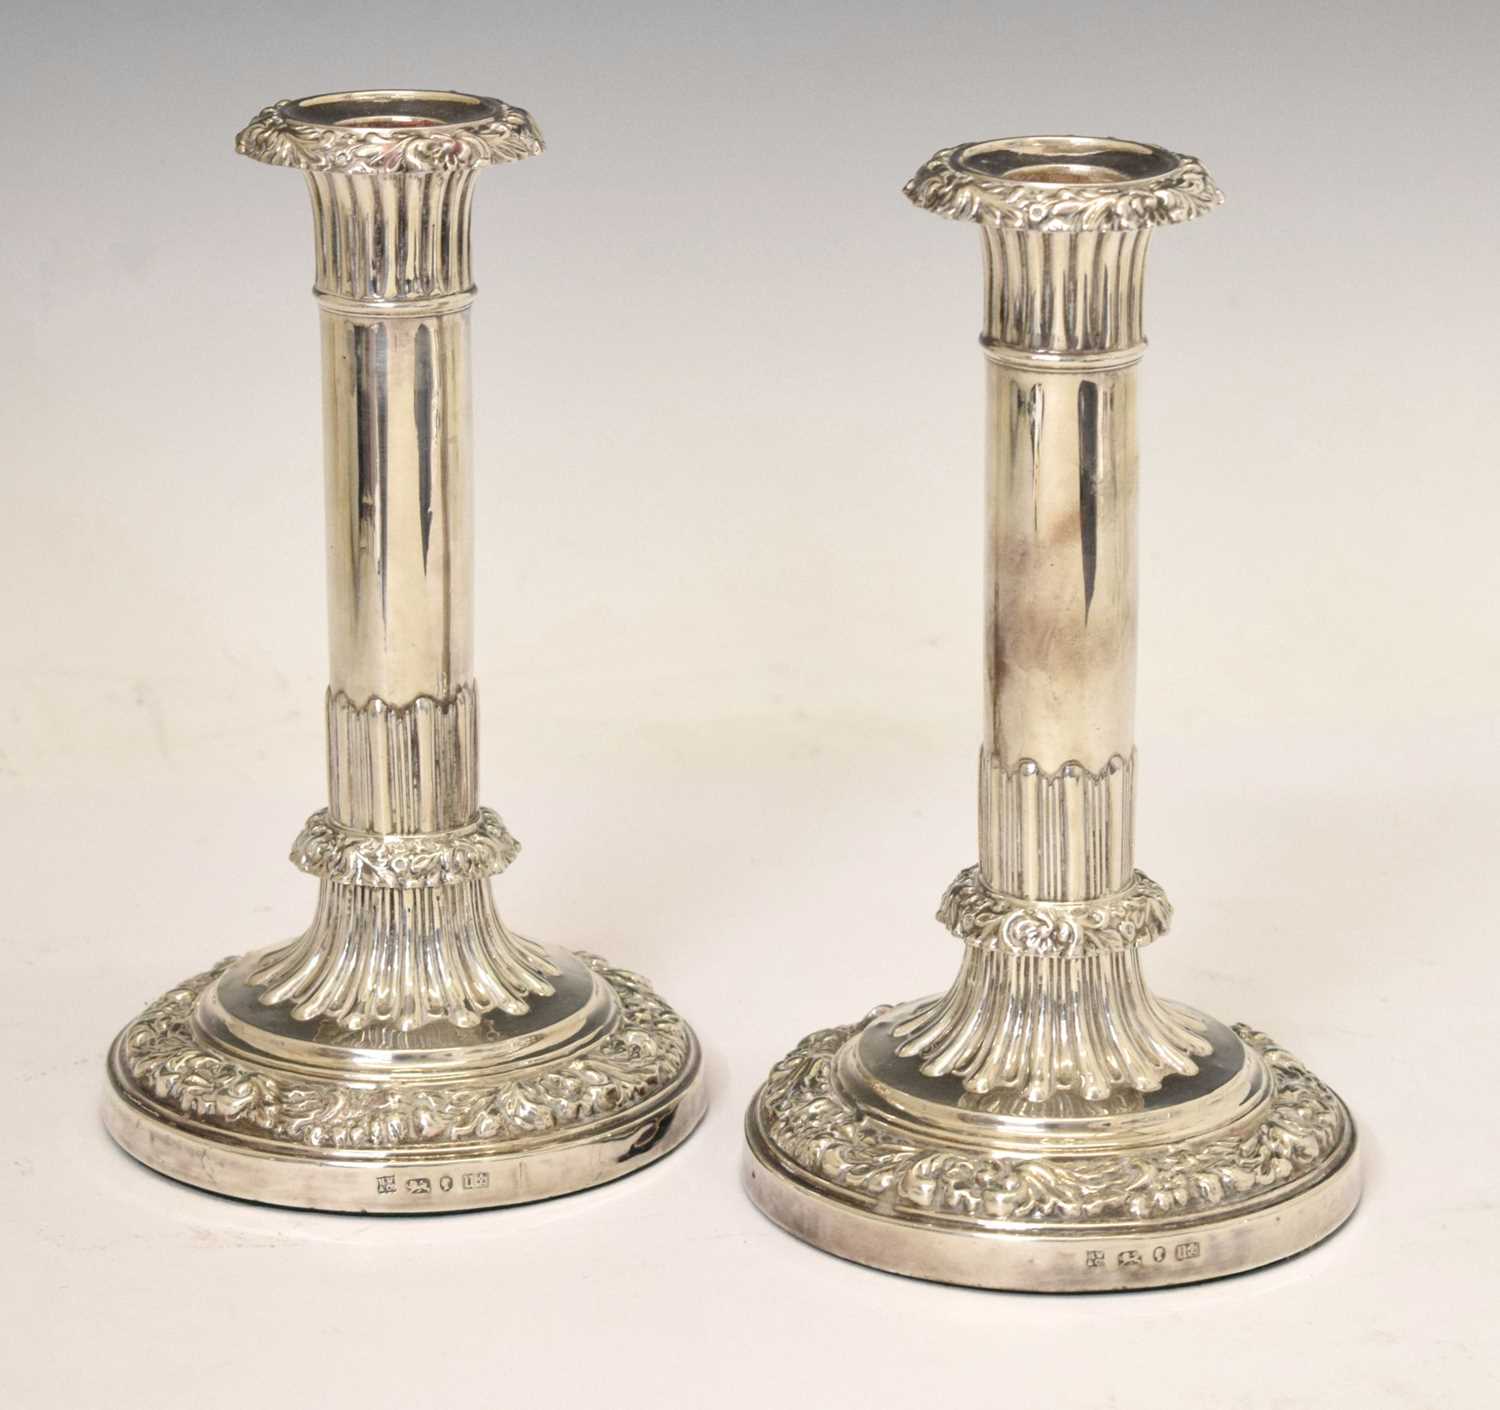 Pair of Victorian silver candlesticks